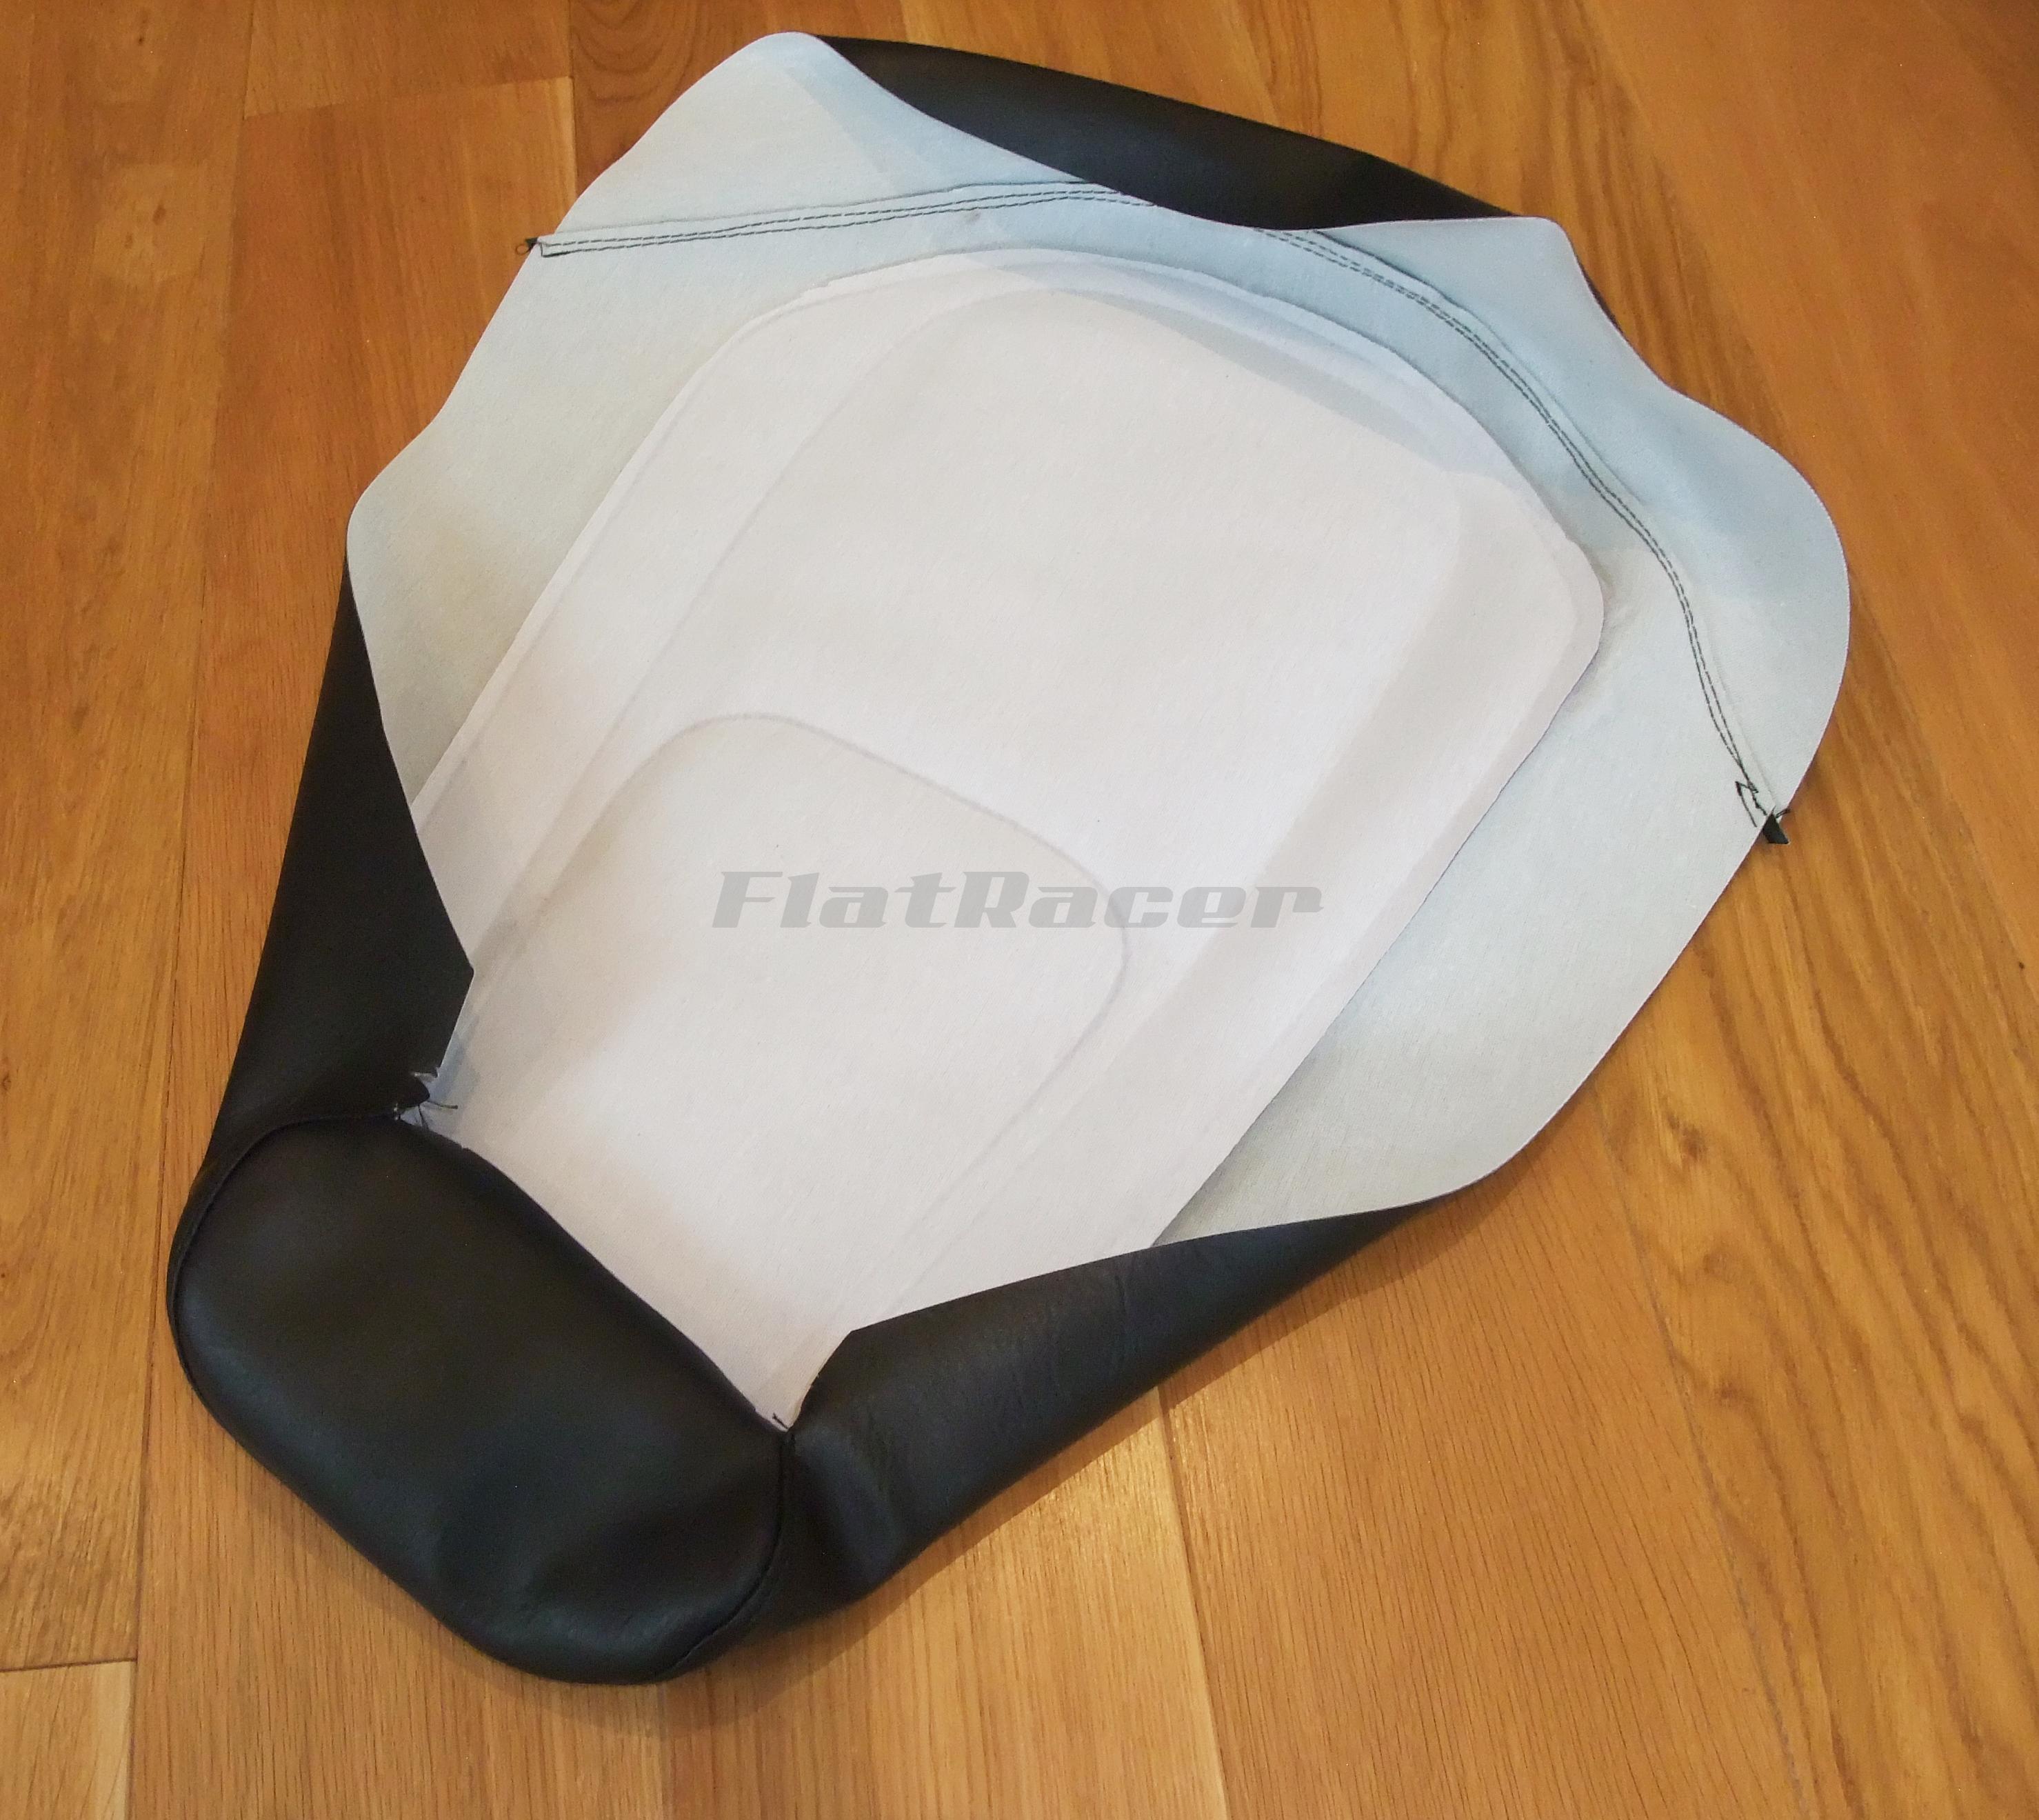 FlatRacer BMW R90S (1973) dual seat replica replacement seat cover - PLAIN PATTERN TYPE